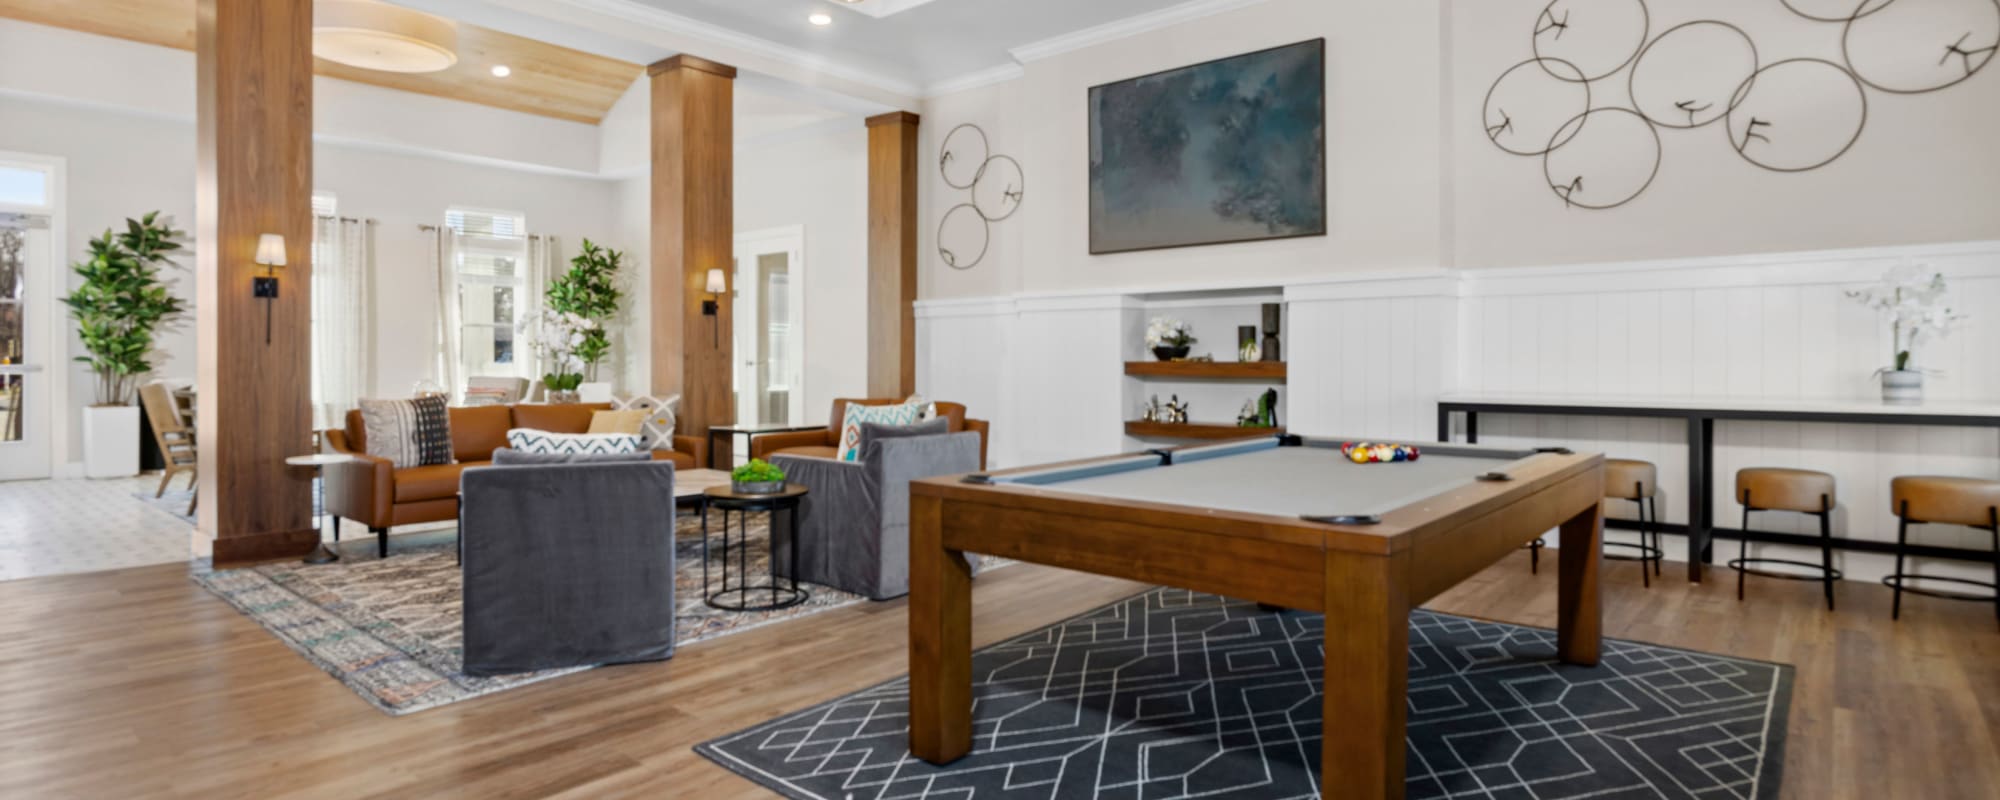 Schedule a tour of The Horizon at Springdale Park in Richmond, Virginia